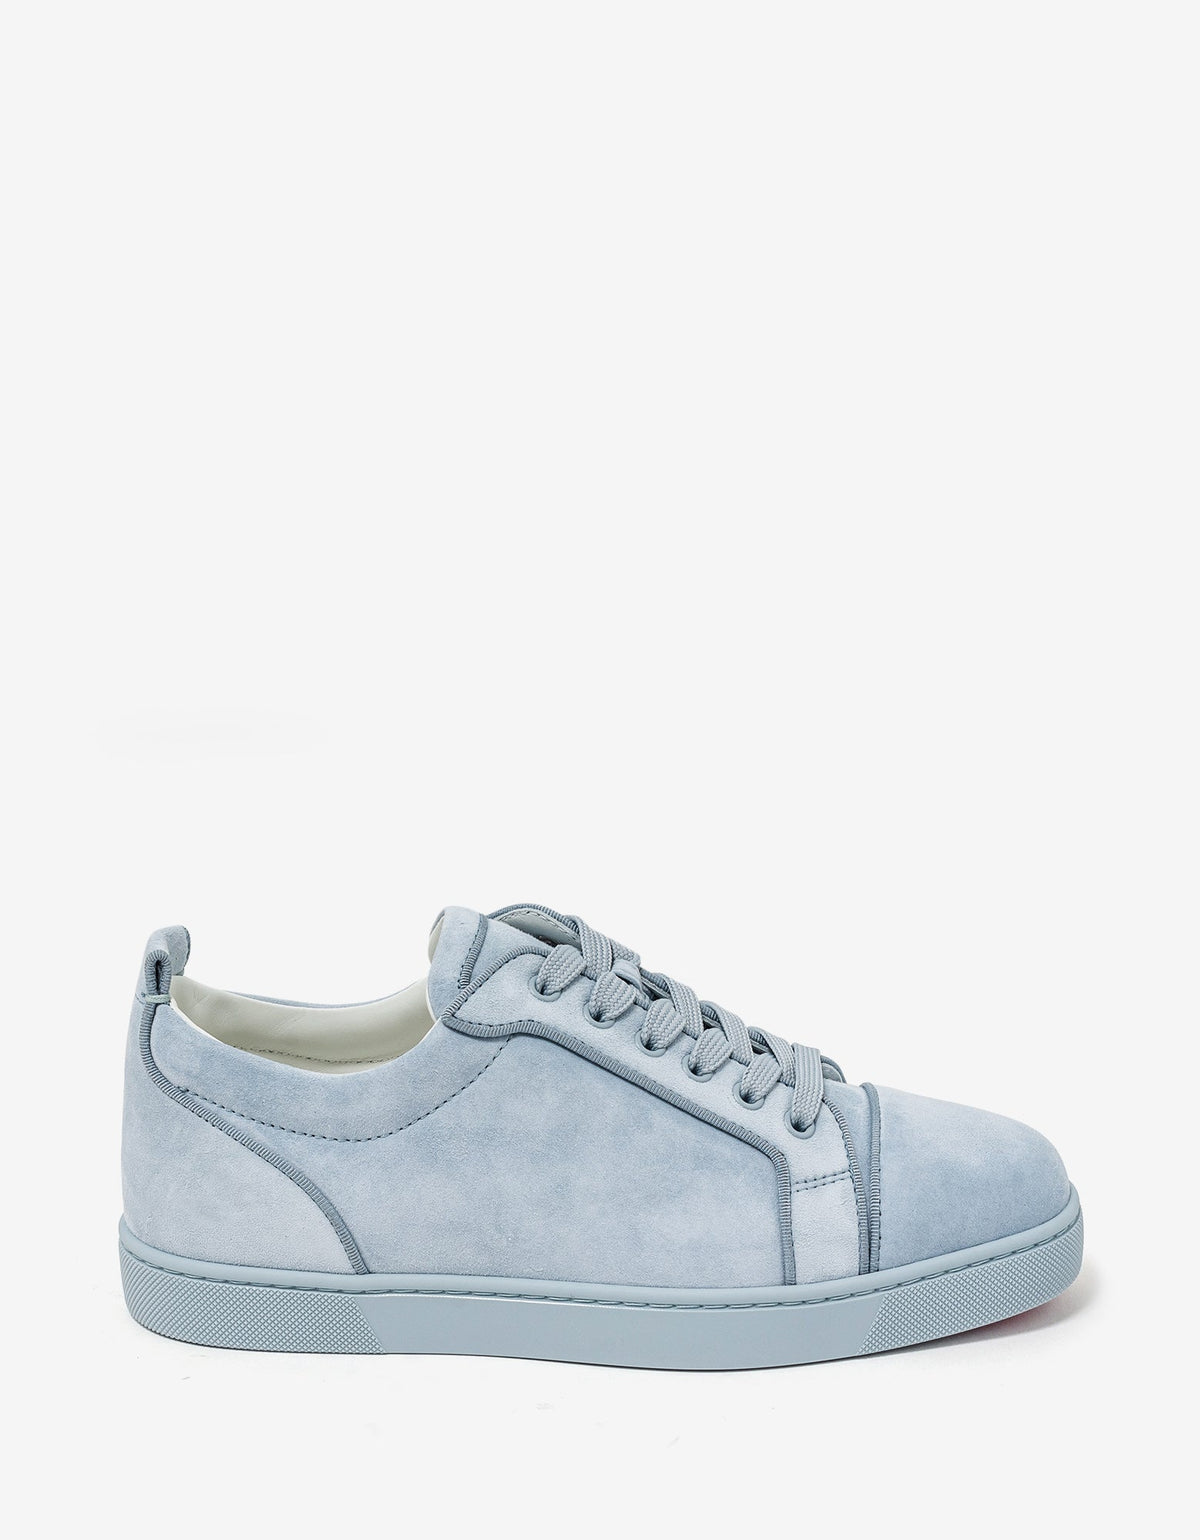 Christian Louboutin - Louis Junior Orlato Paseo Blue Suede Trainers -